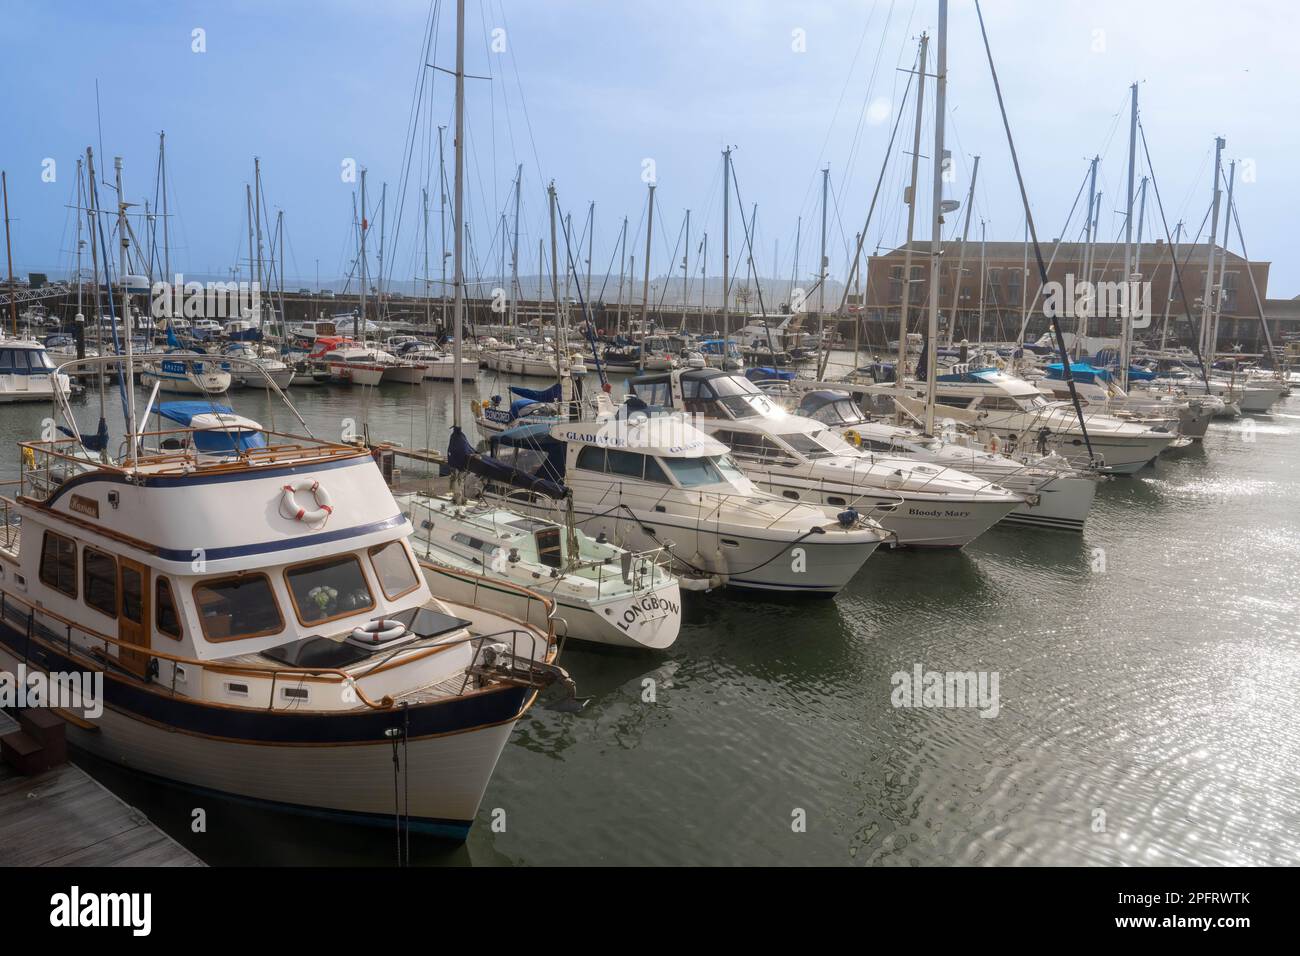 Yachts and boats moored in the harbour marina at Milford Haven Pembrokeshire Wales UK Stock Photo